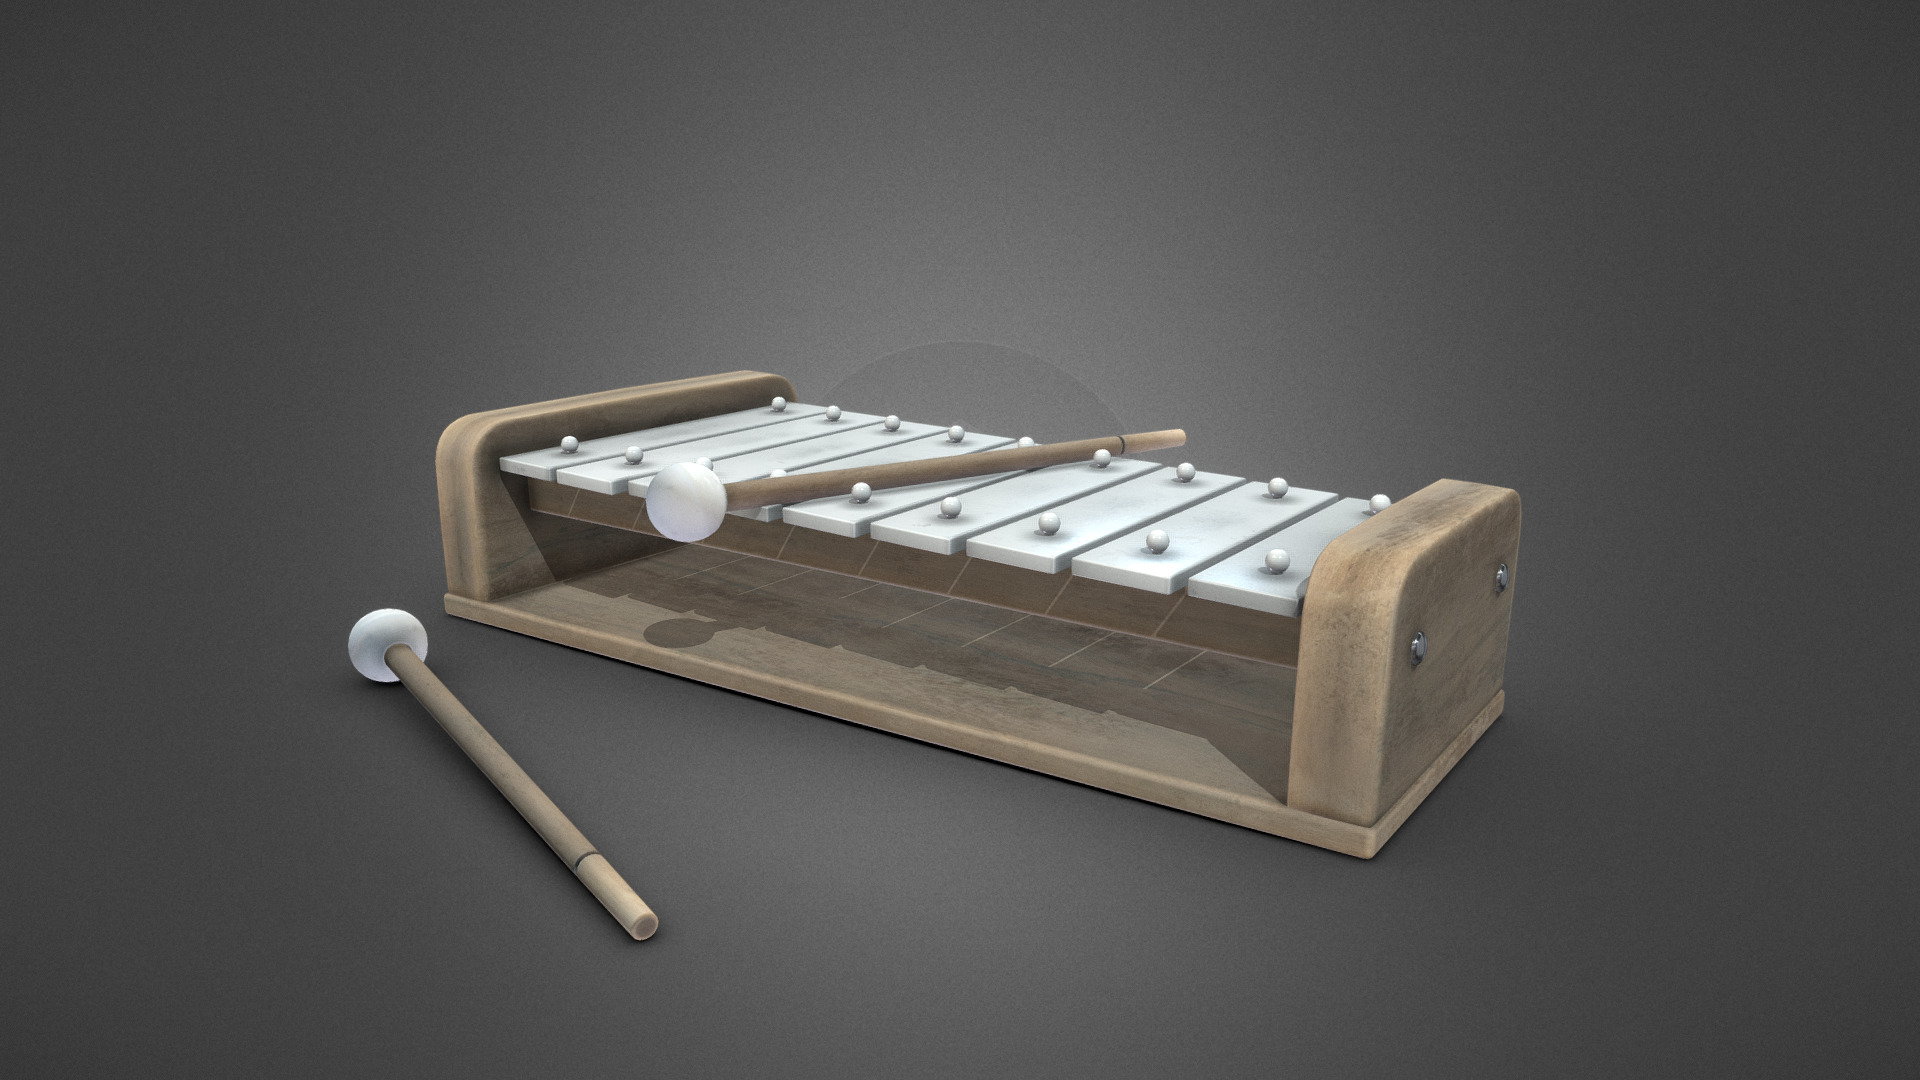 3D model Toy xylophone - This is a 3D model of the Toy xylophone. The 3D model is about a wooden model of a guitar.